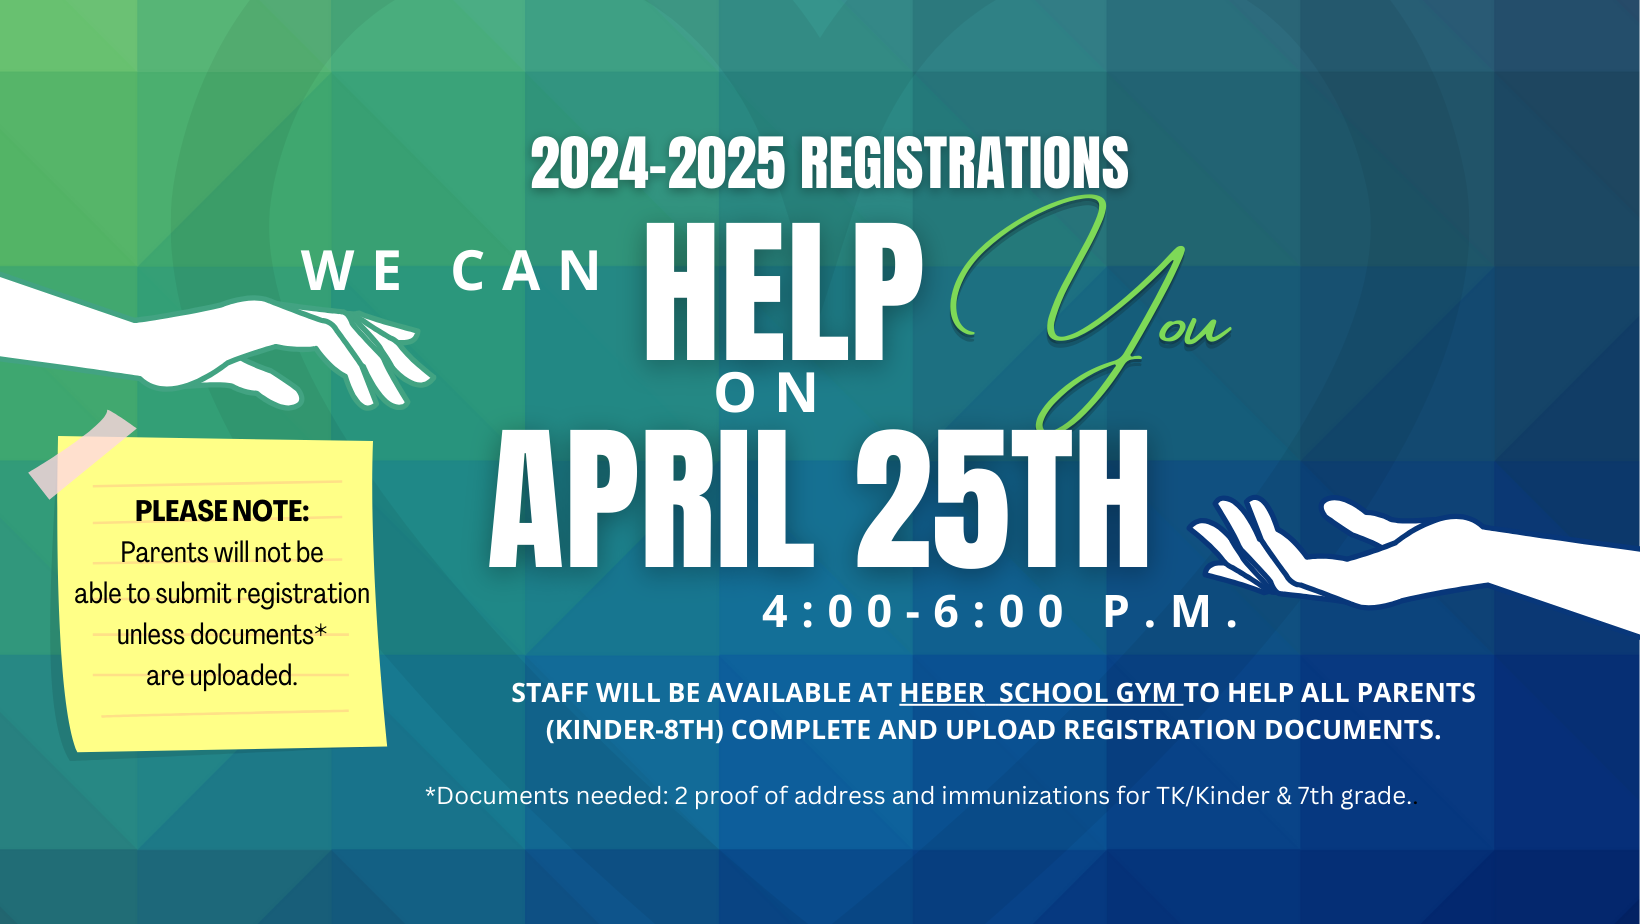 Registration help. April 25 at the Heber School Gym from 4-6pm